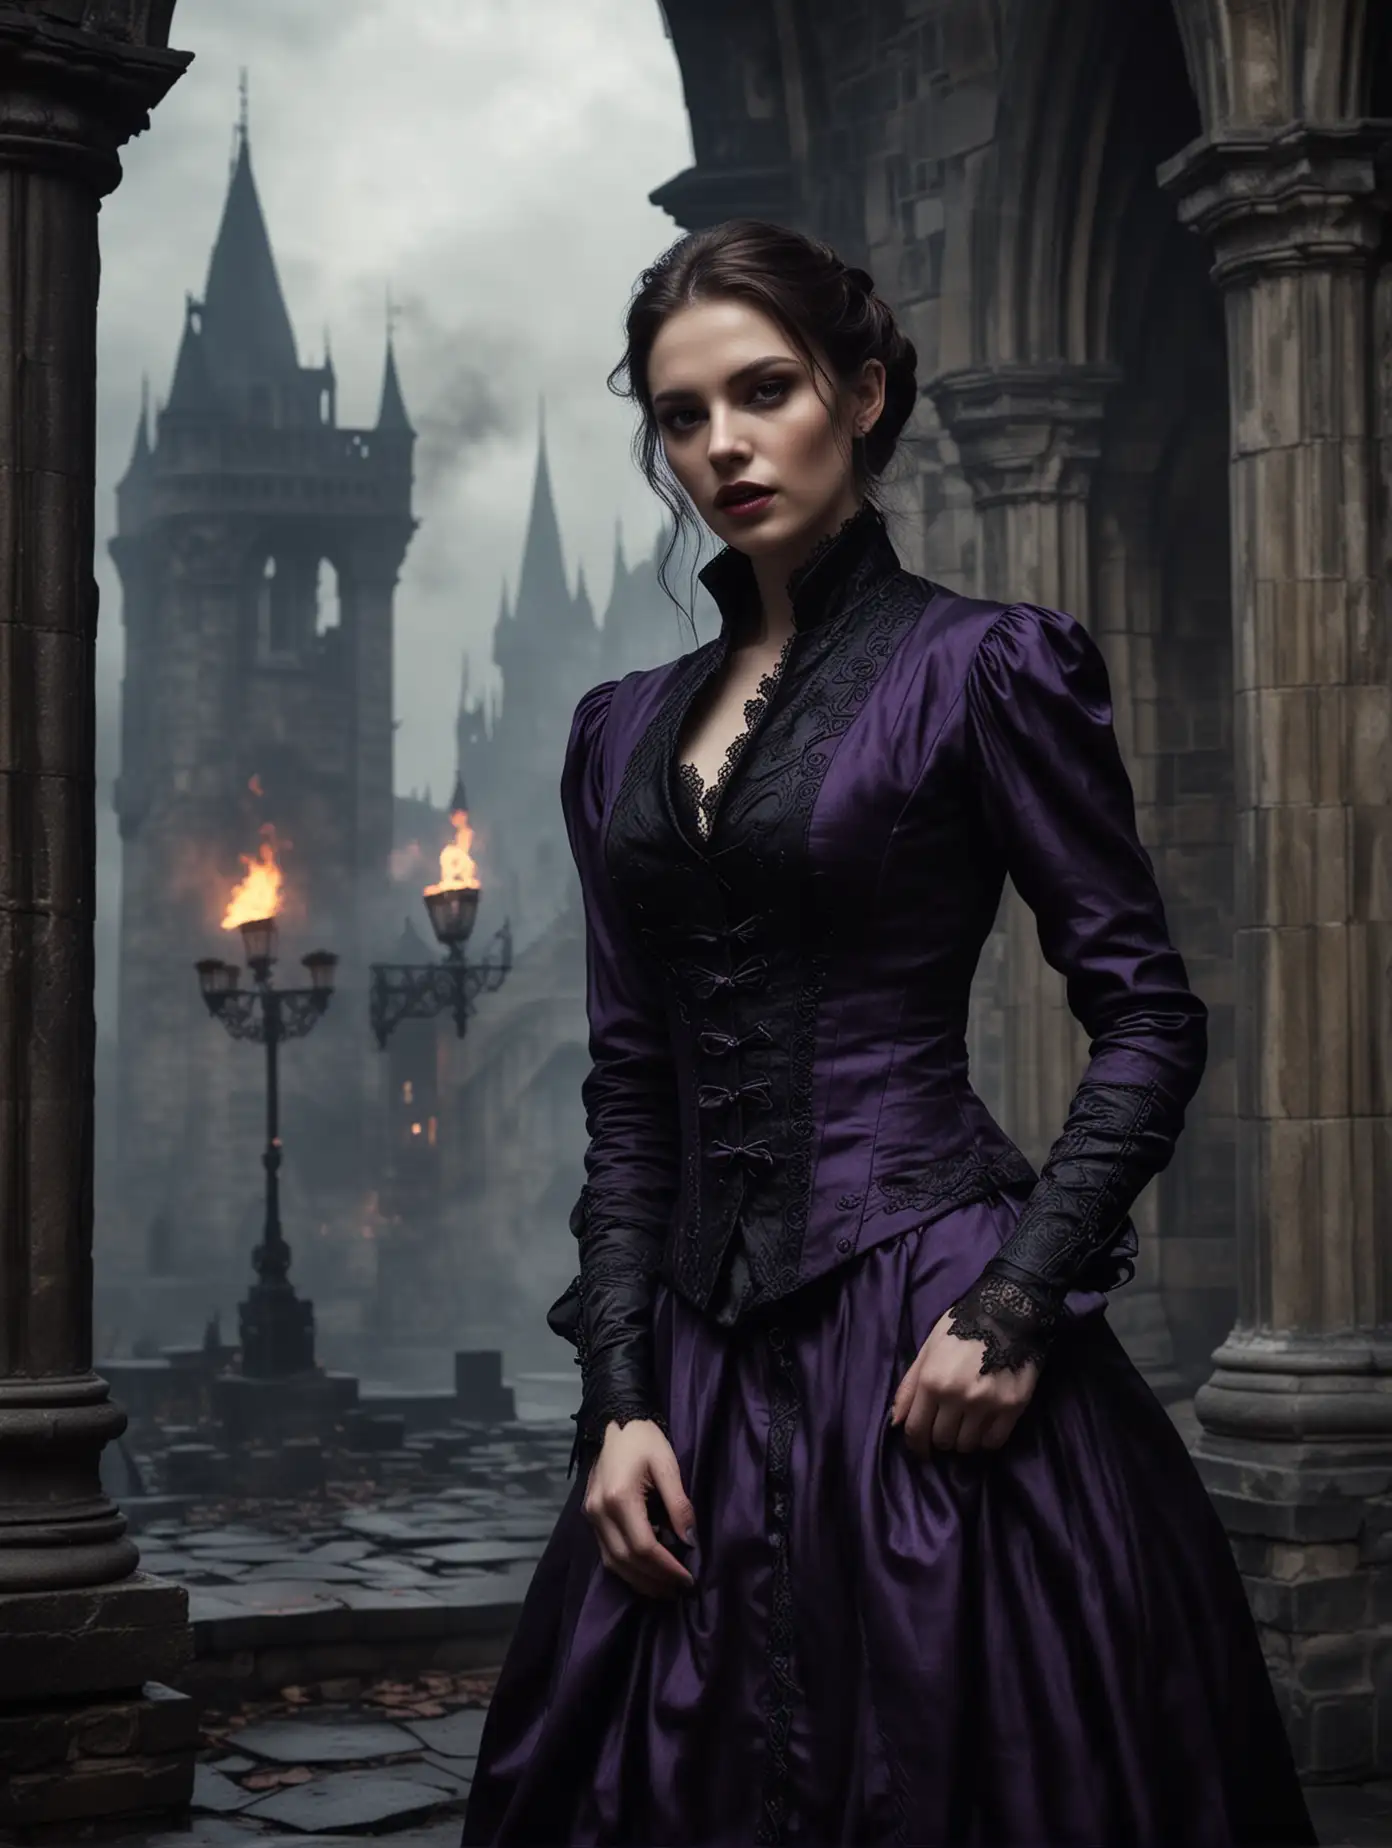 Victorian Vampire Woman in a Misty Gothic Castle